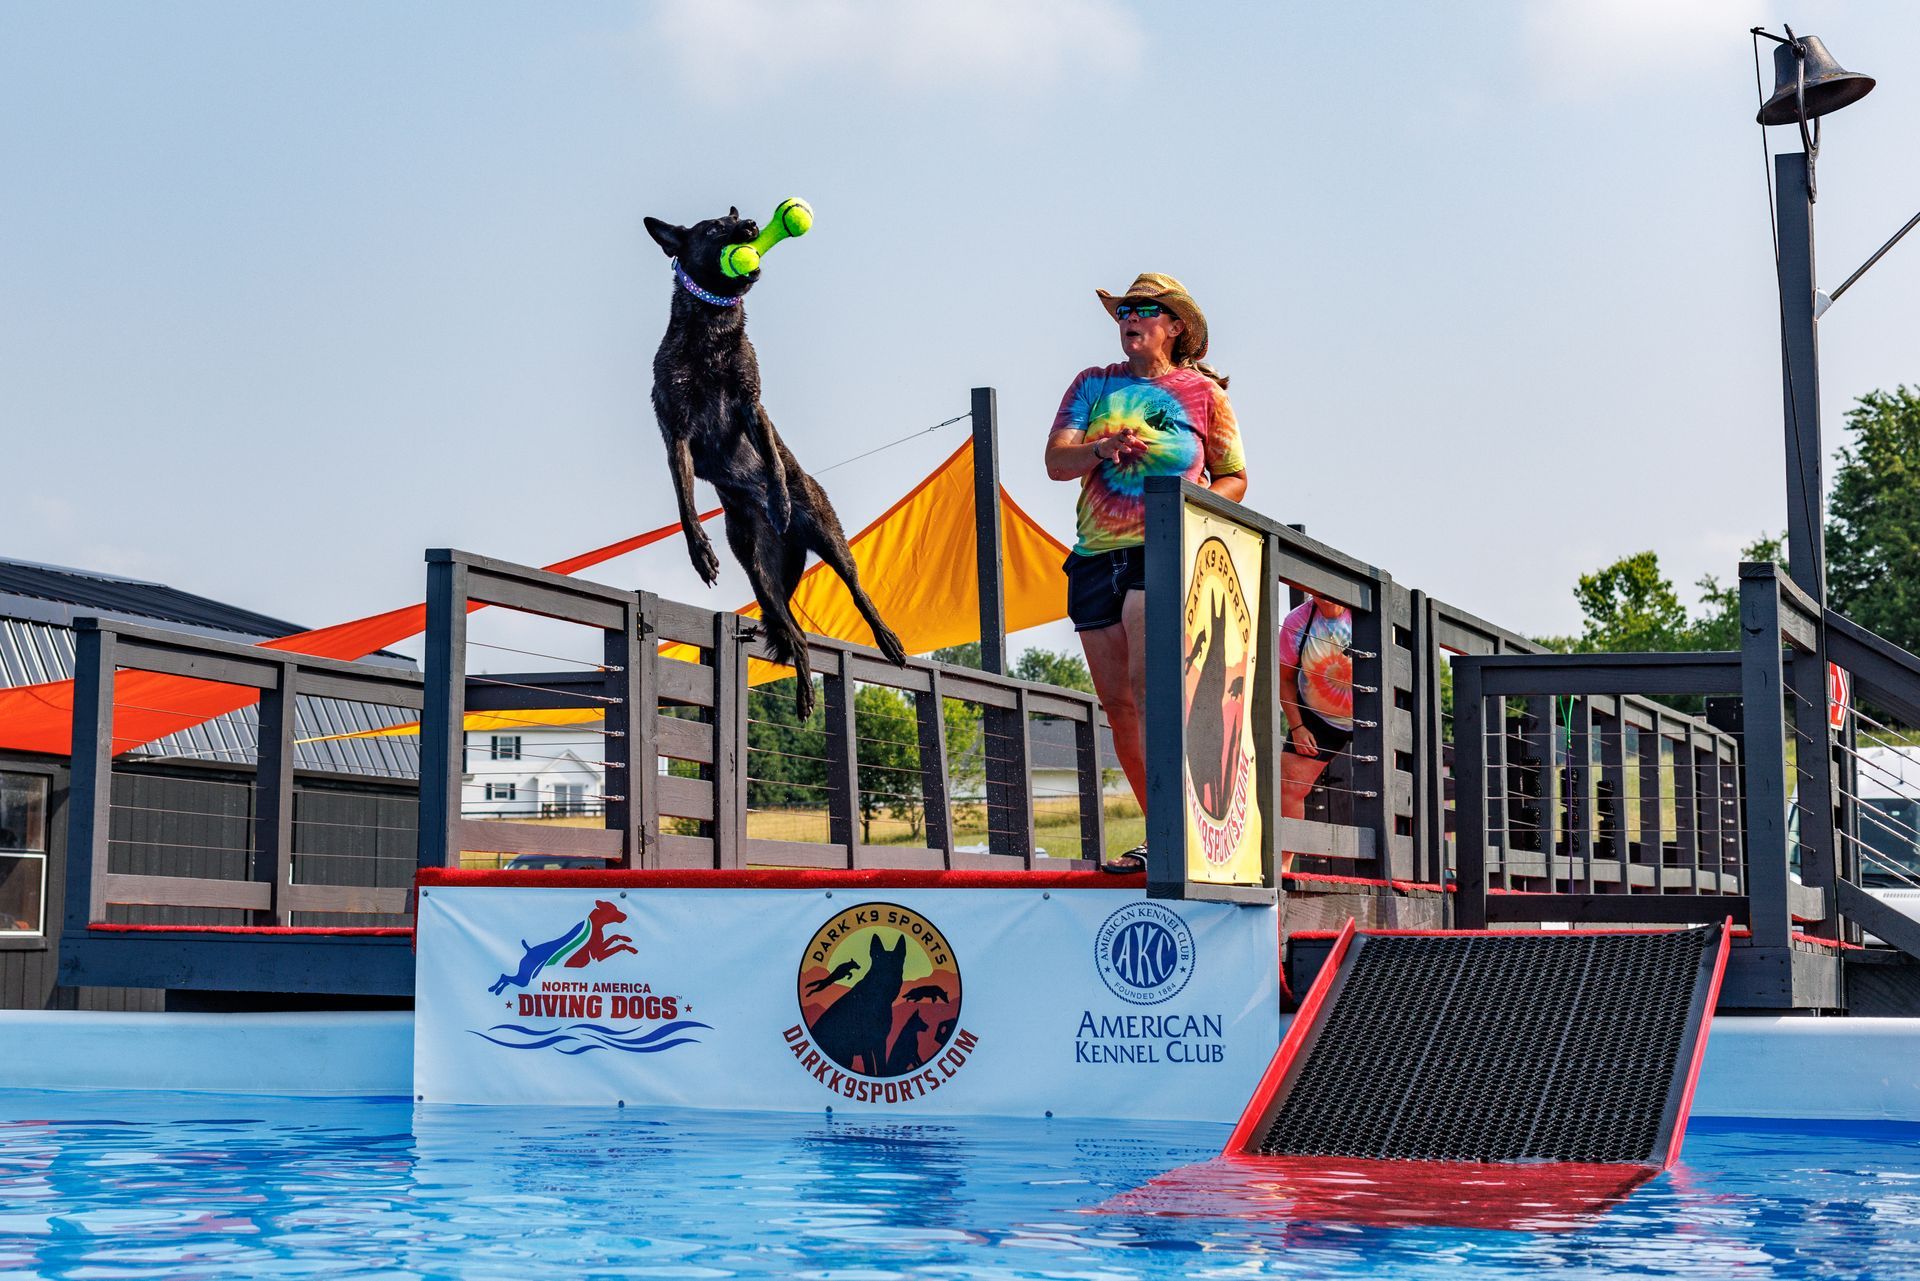 a woman is standing next to a dog that is jumping into a pool .